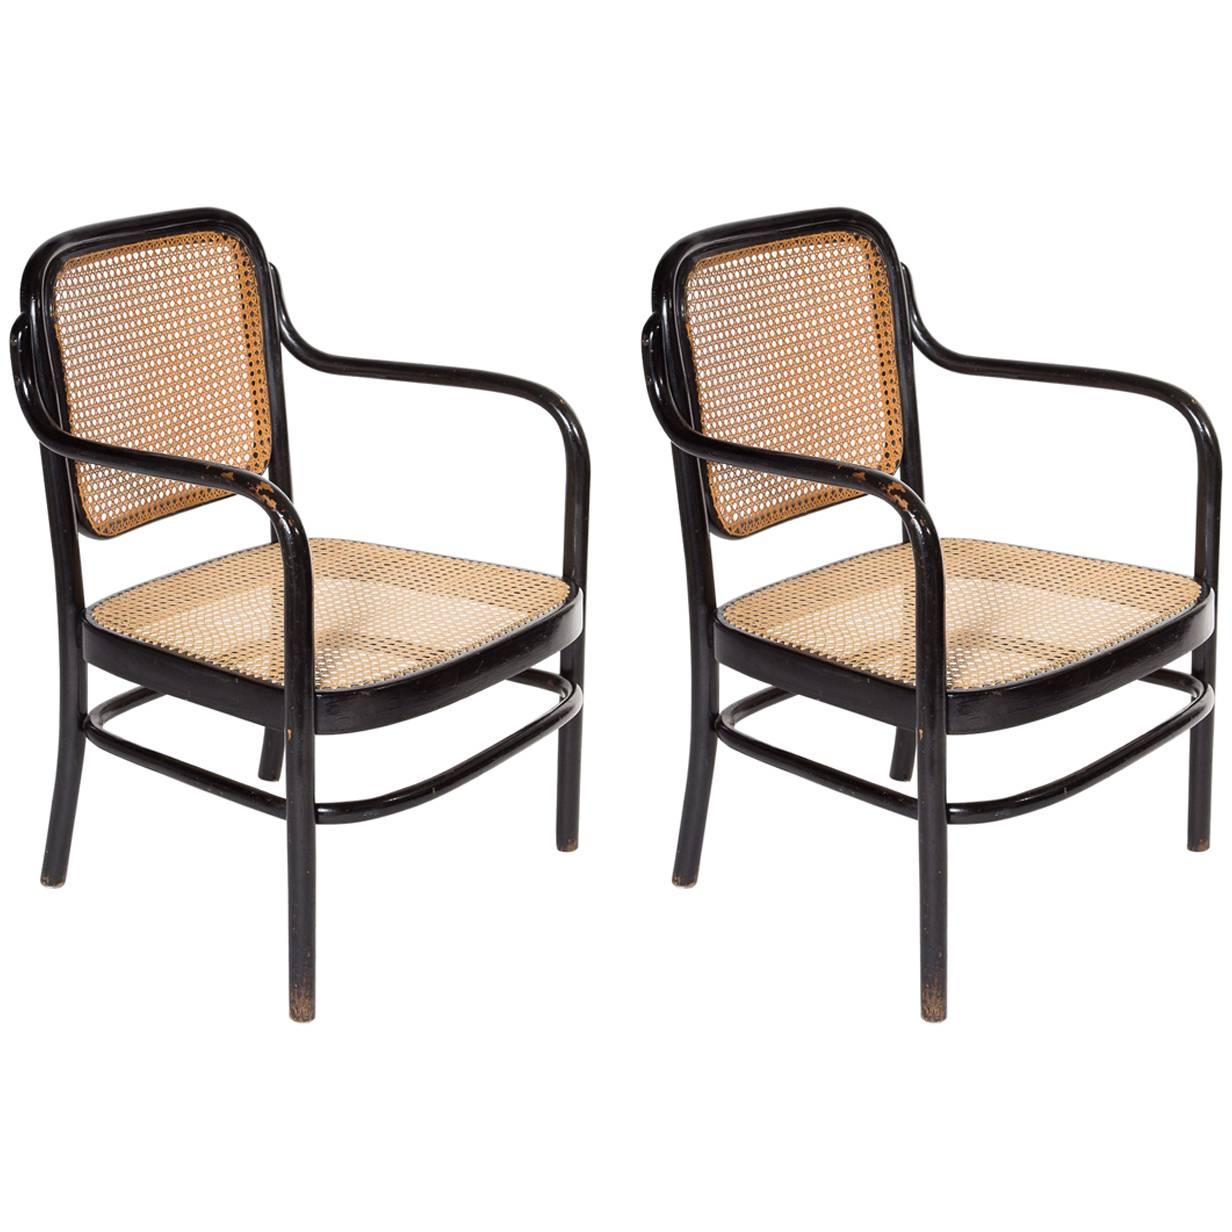 Early Pair of Thonet Adolf Schneck A61F Bentwood Low Chairs, Austria, 1925